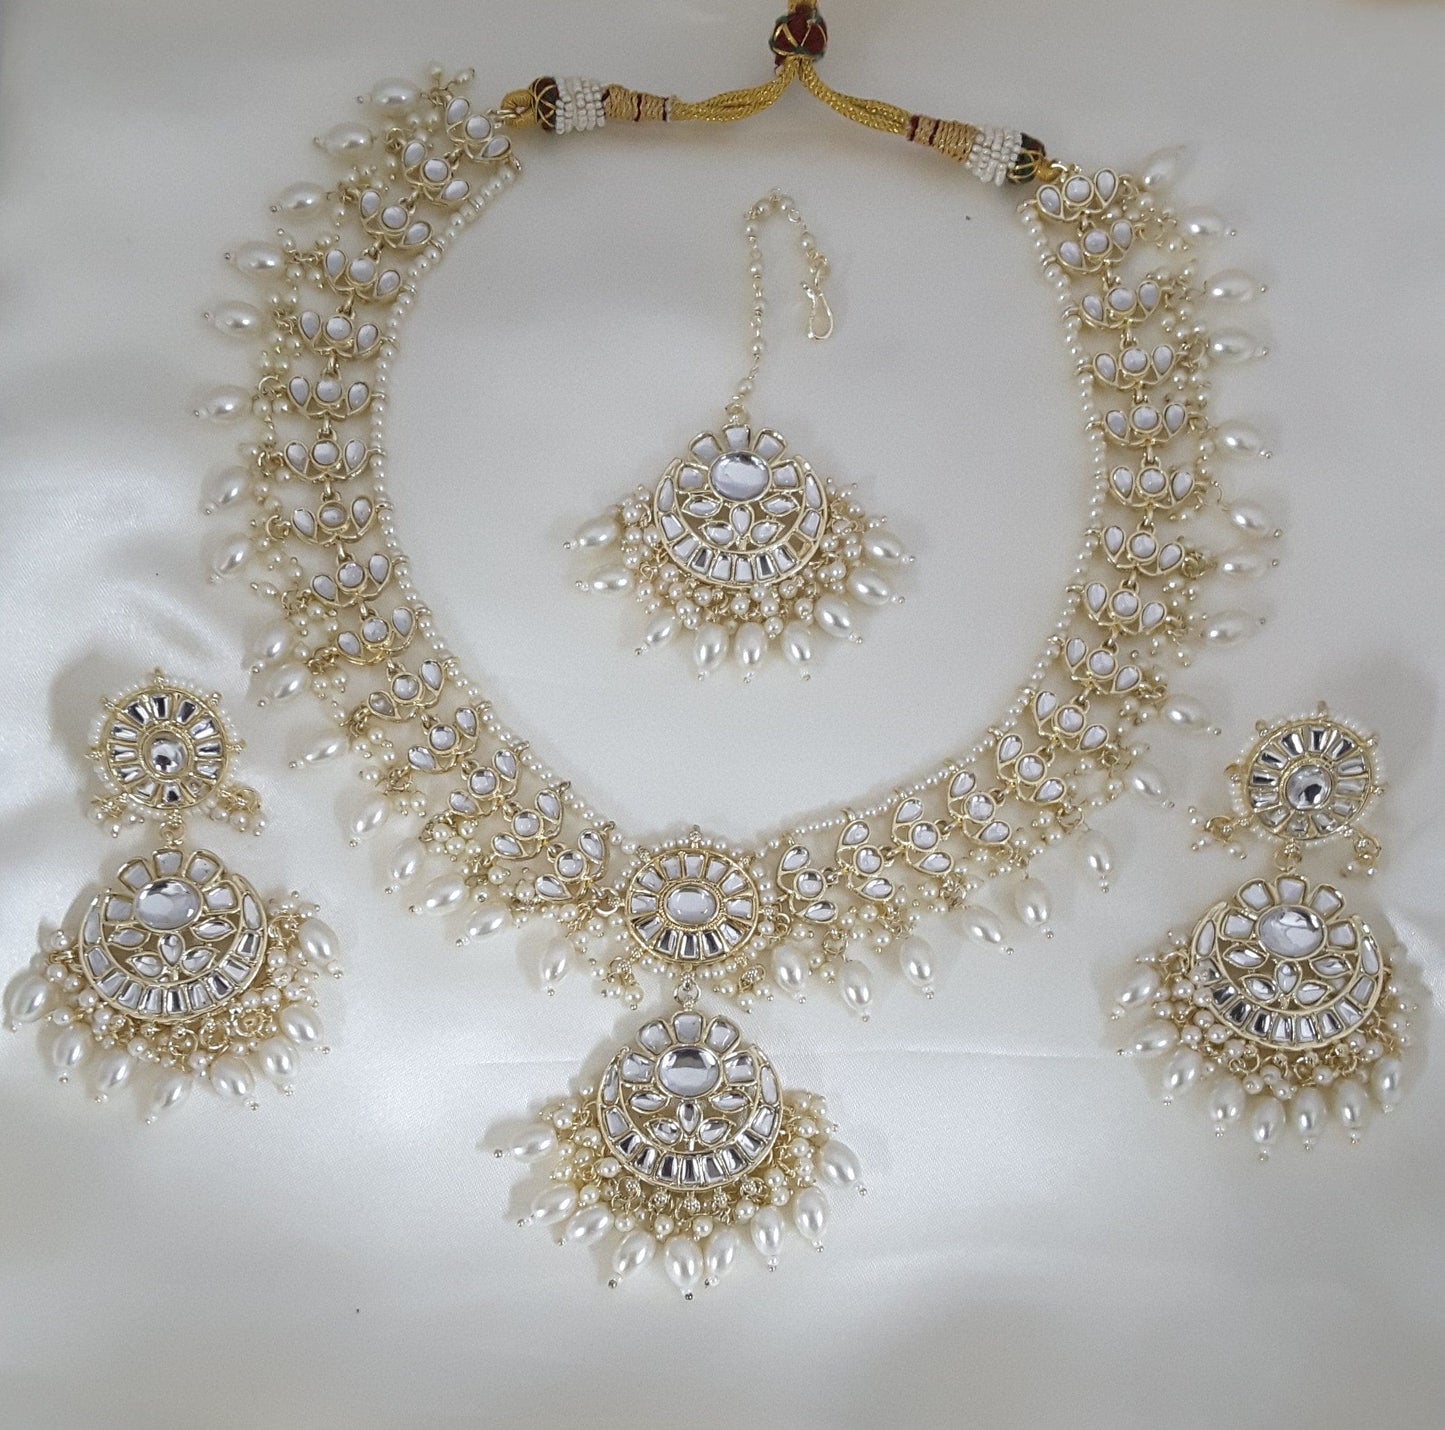 Moonstruck Traditional Indian White Kundan and Pearl Beads Long Regal Necklace Earring Set with Maang tikka for Women(White) - www.MoonstruckINC.com